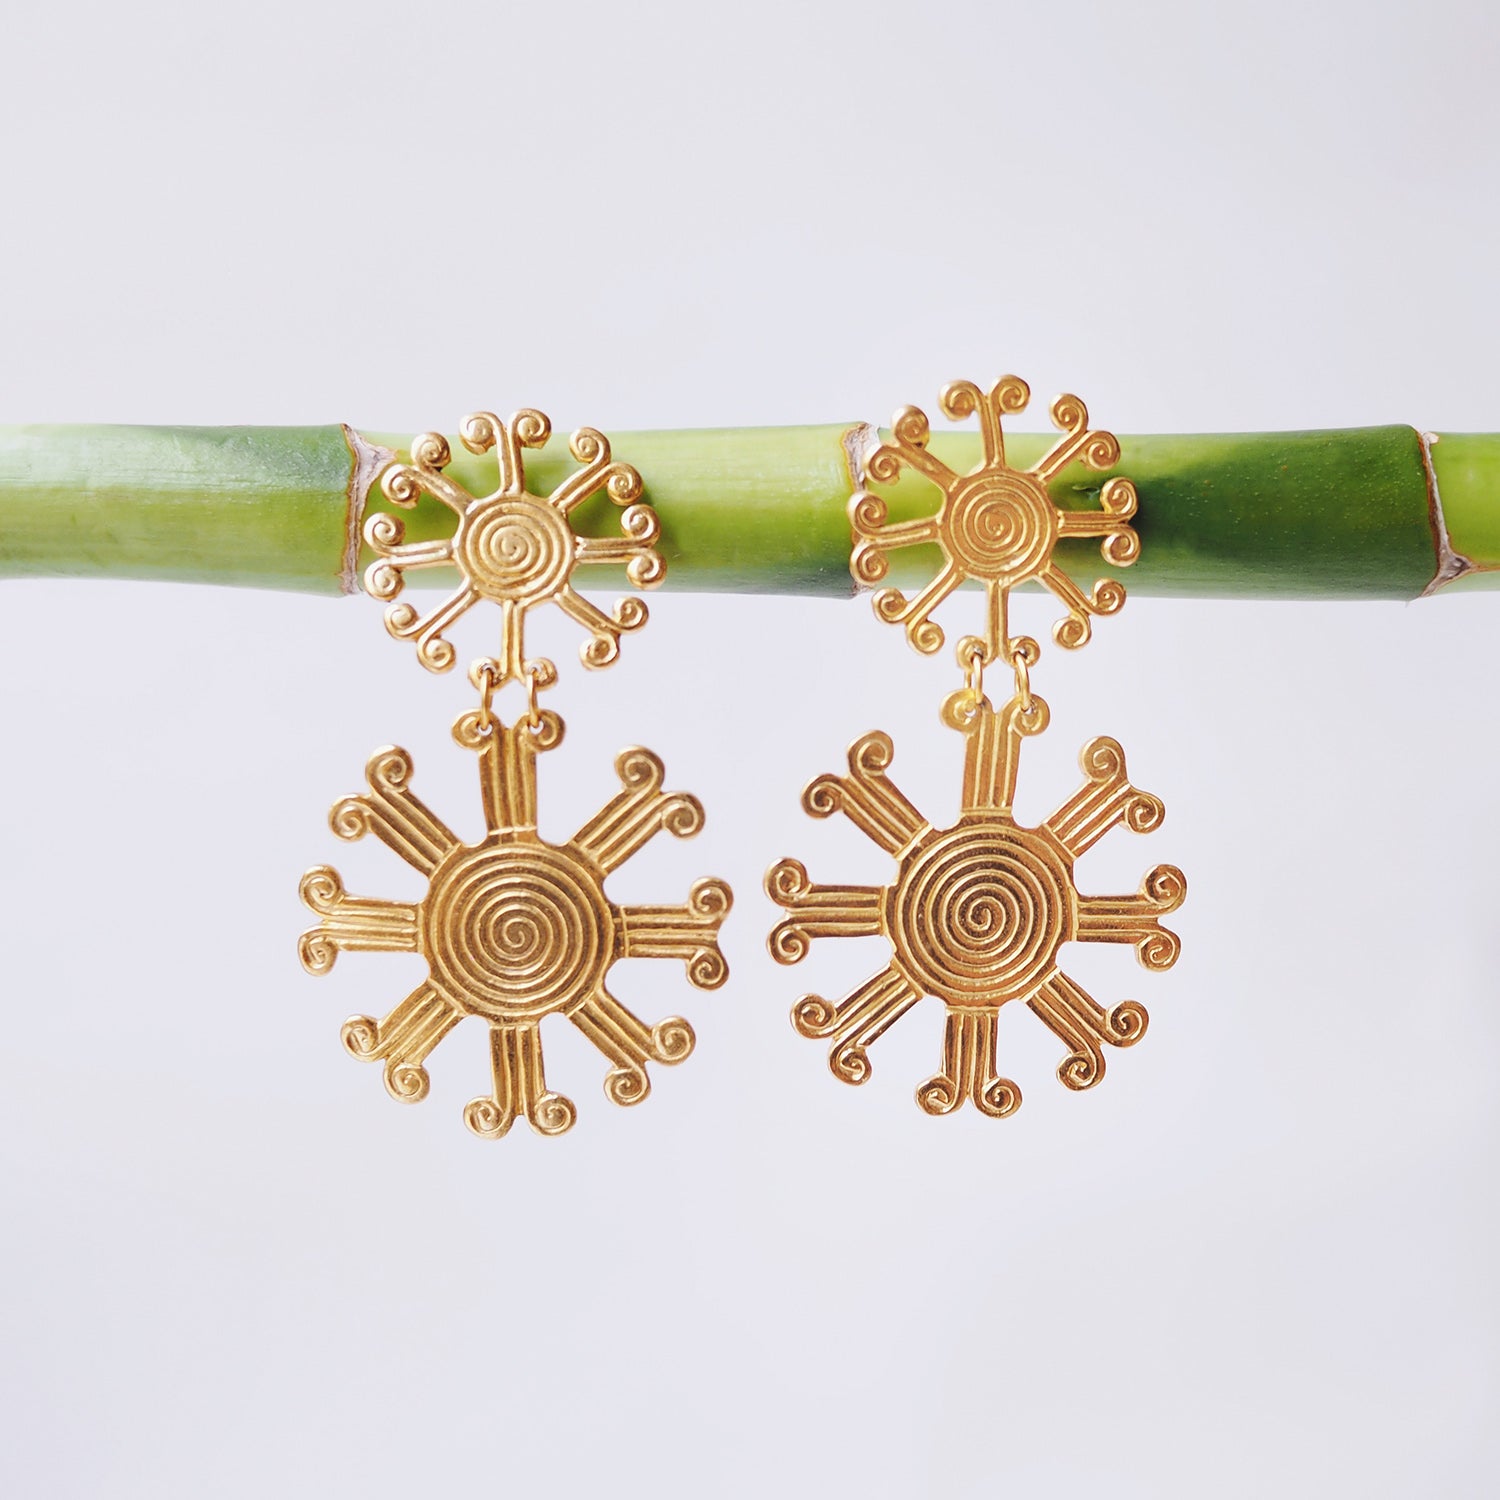 These earrings are a reproduction of pre-colombian jewellery found in the Americas before the Conquistadors arrived. Much of the gold was melted and shipped back to Spain but what little survived can be found in the Museums of Pre-Colombian art in the region. These earrings take on pre-colombian elements and reassemble them into earrings.